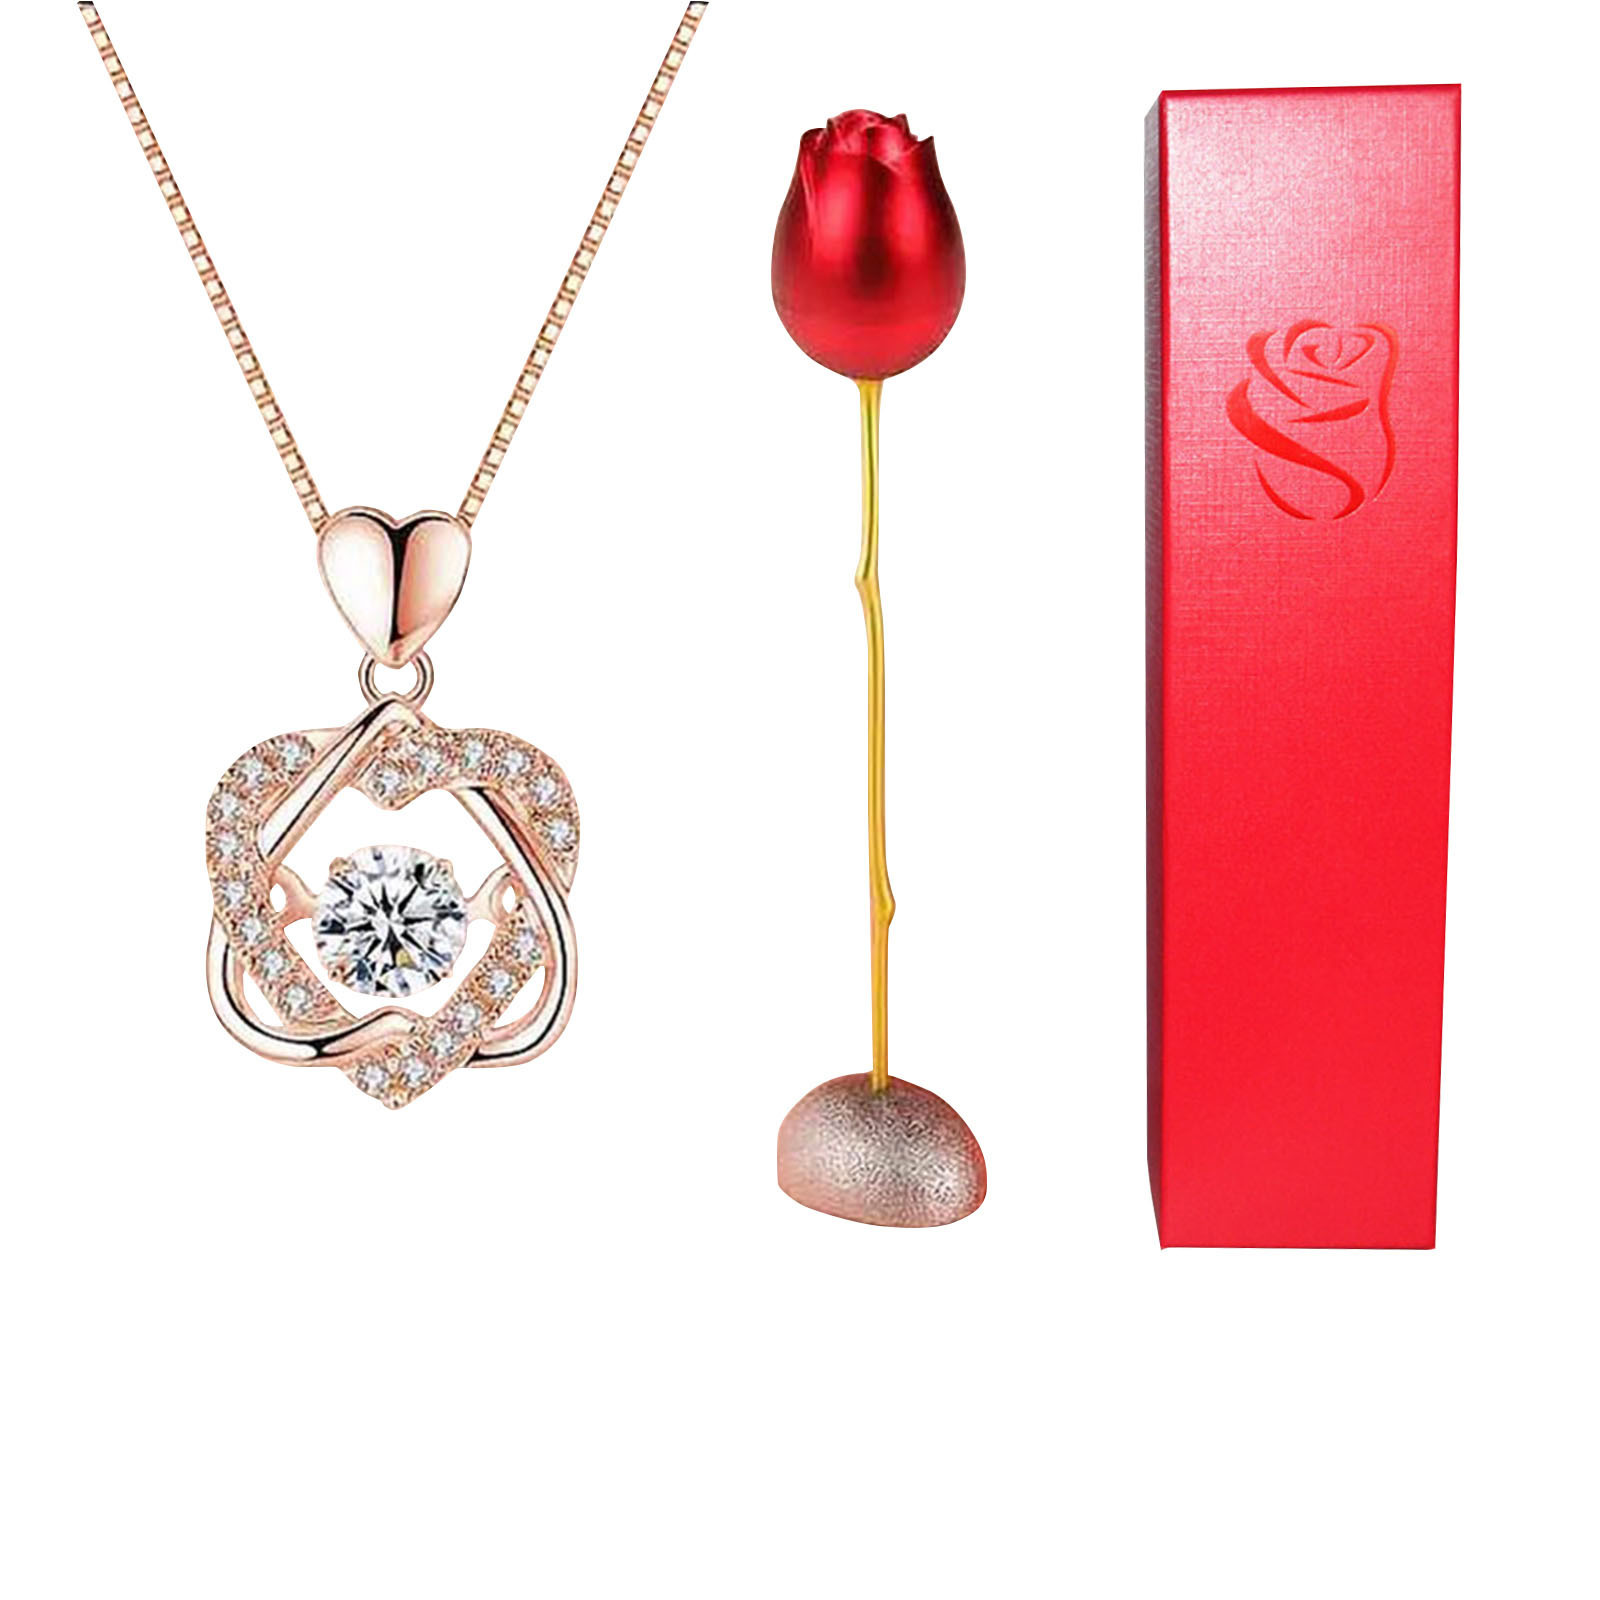 Rose and Pendant Gift Pack 15